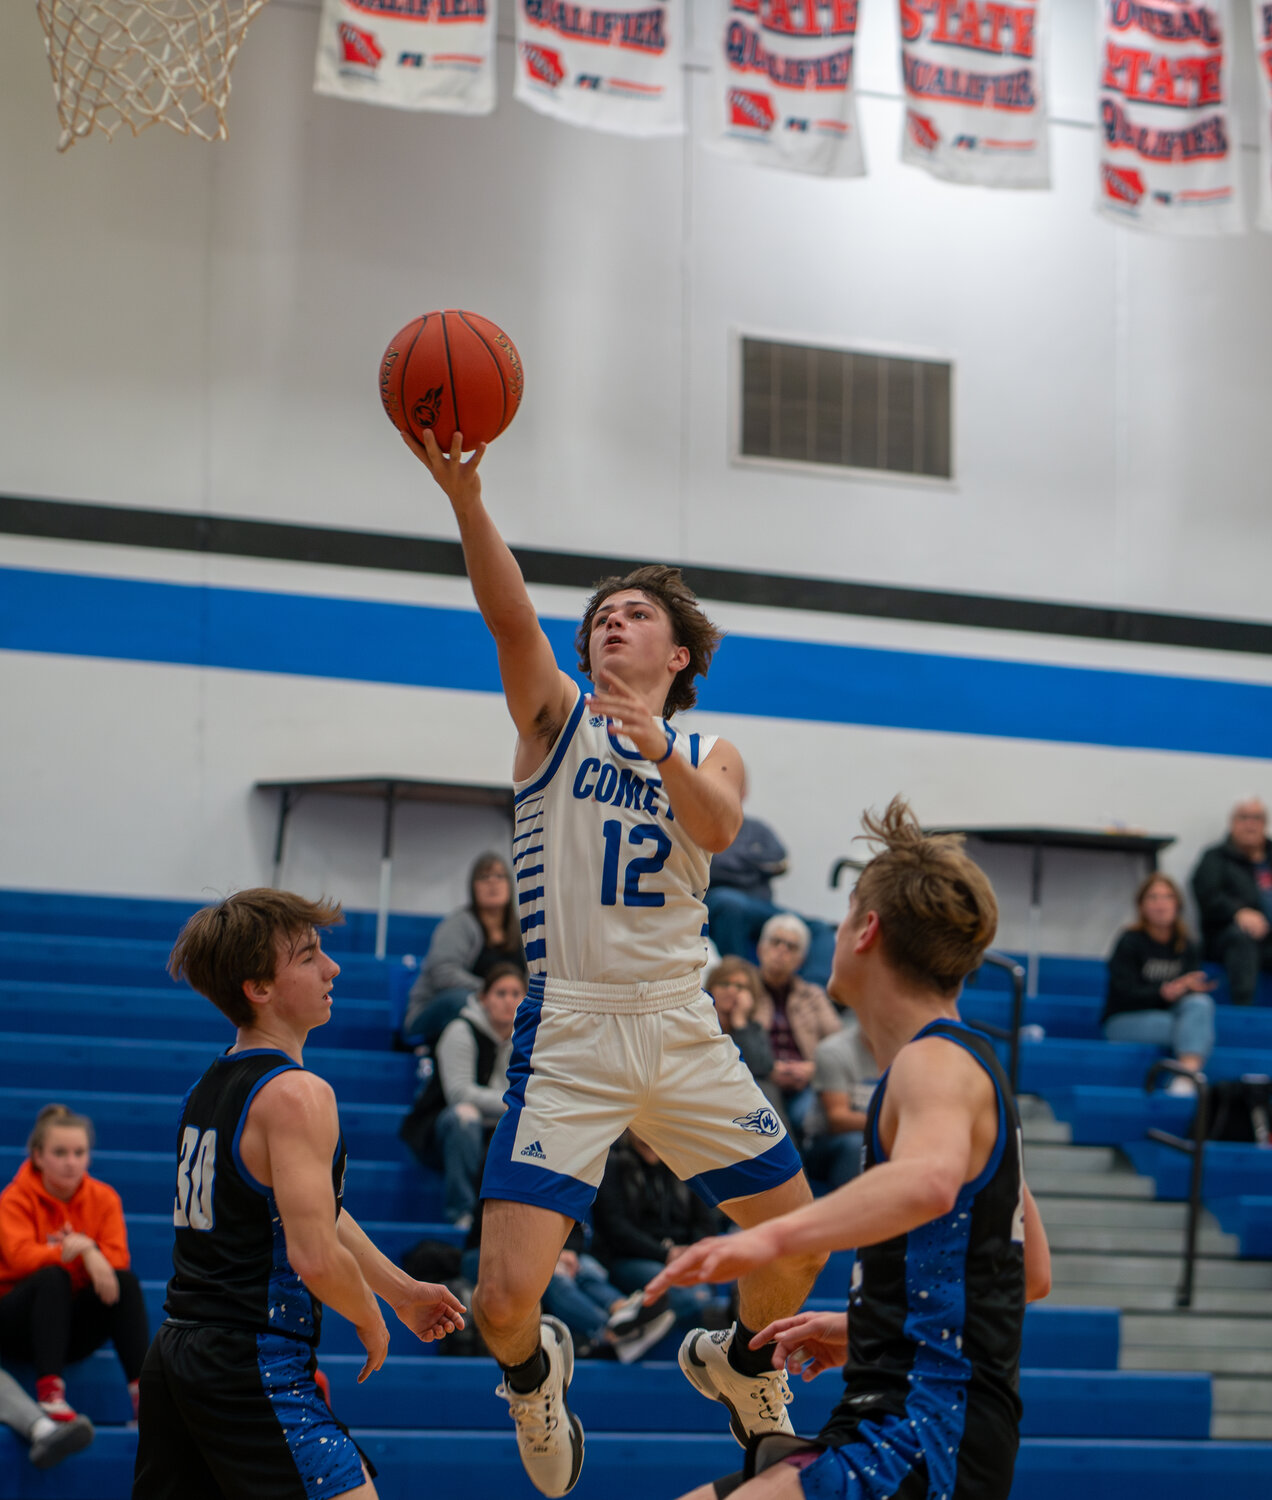 Seth Axsom explodes to the rim in last week's double-Comet matchup against Bellevue.